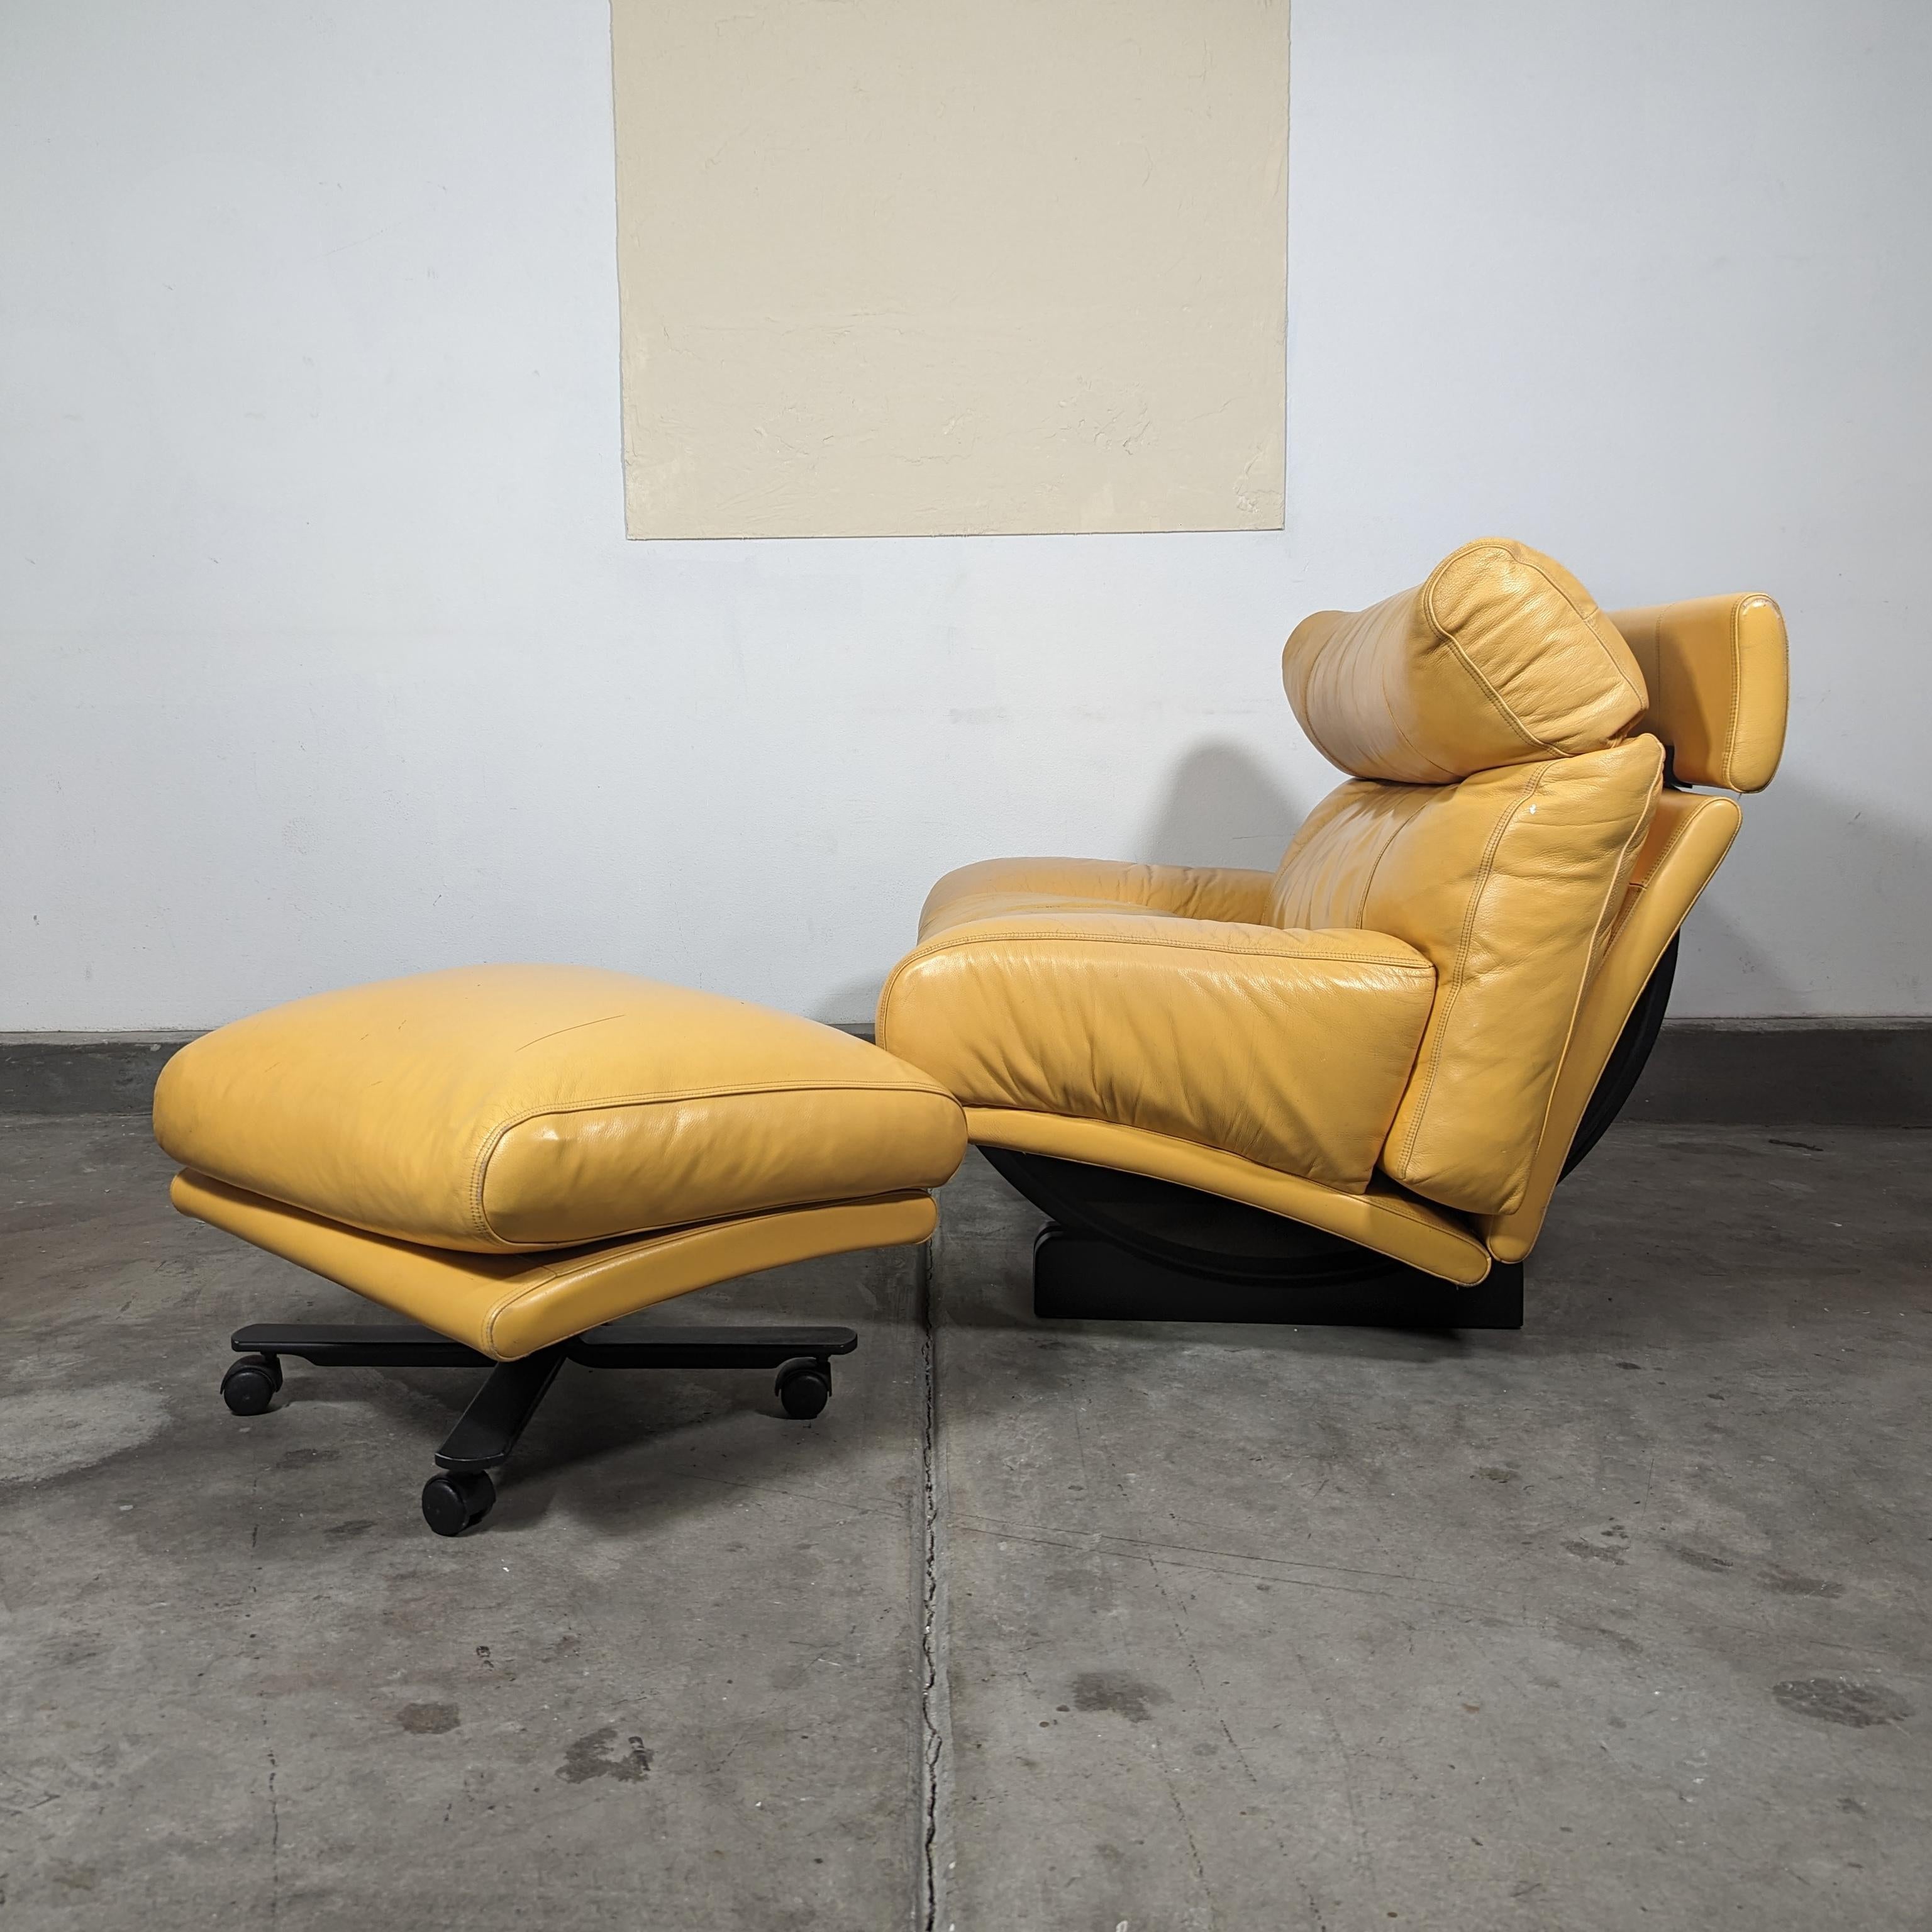 Postmodern Walse Leather Lounge Chair by Tito Agnoli for Poltrona Frau, c1990s For Sale 1